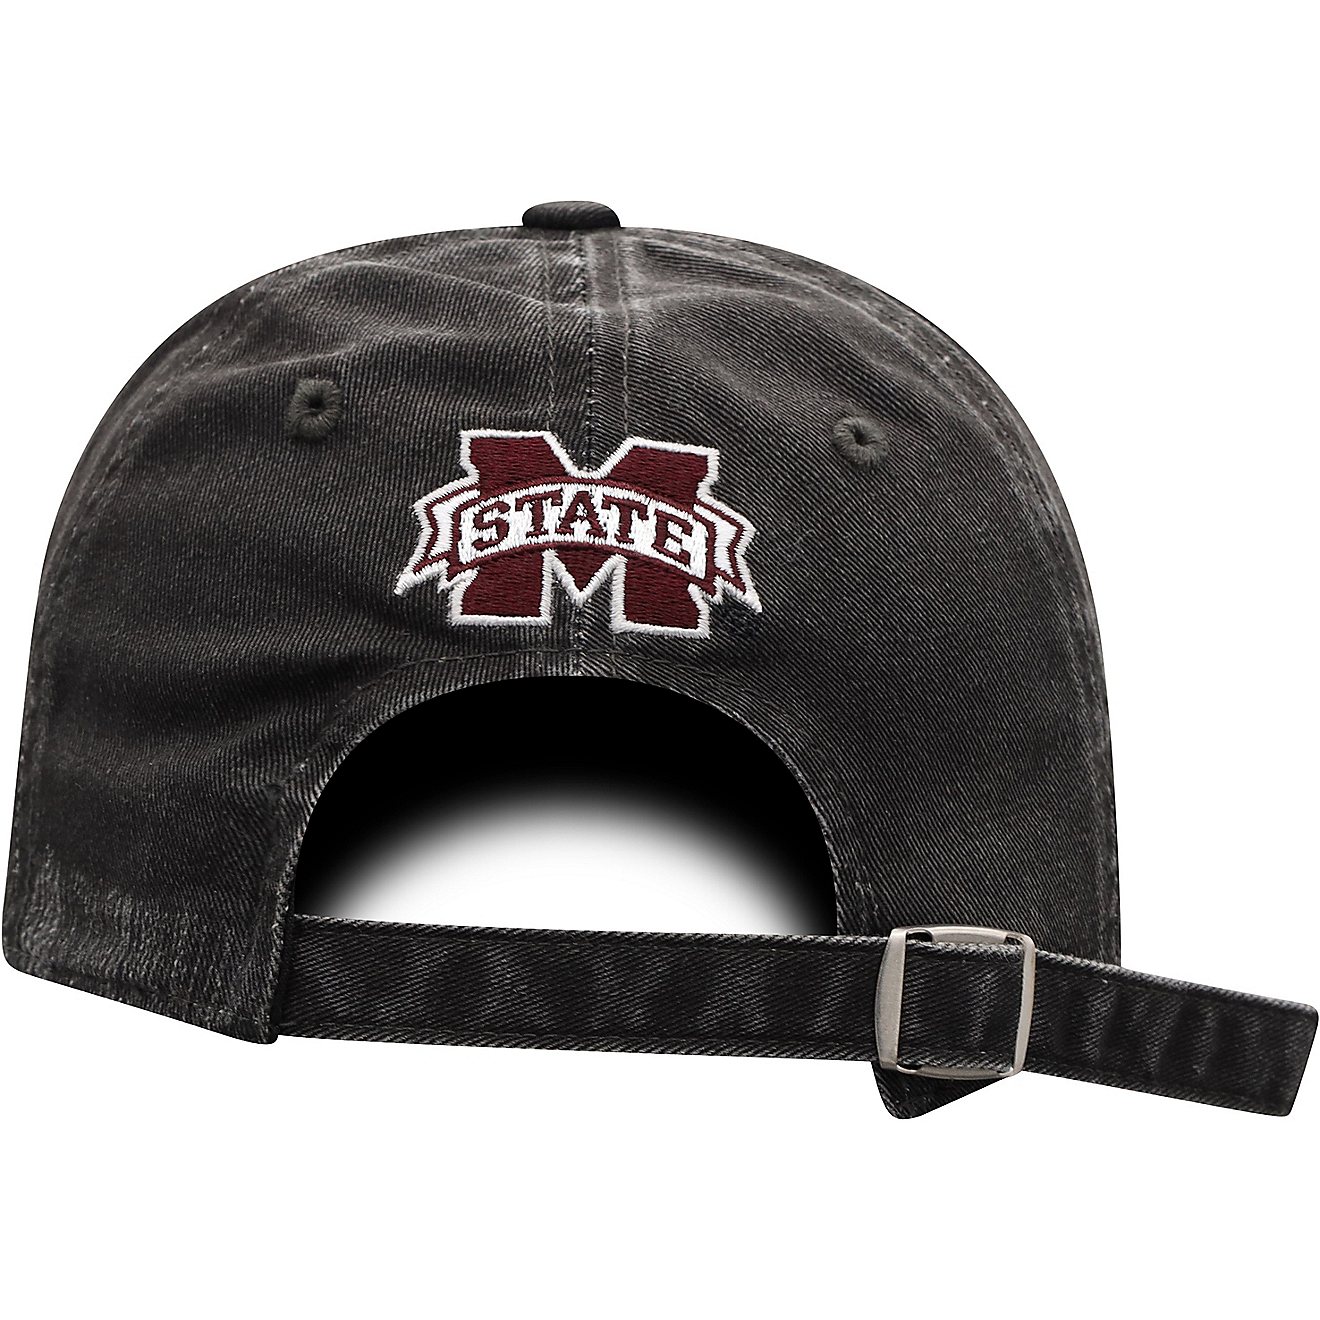 Top of the World Women's Mississippi State University Sola Adjustable Hat                                                        - view number 4